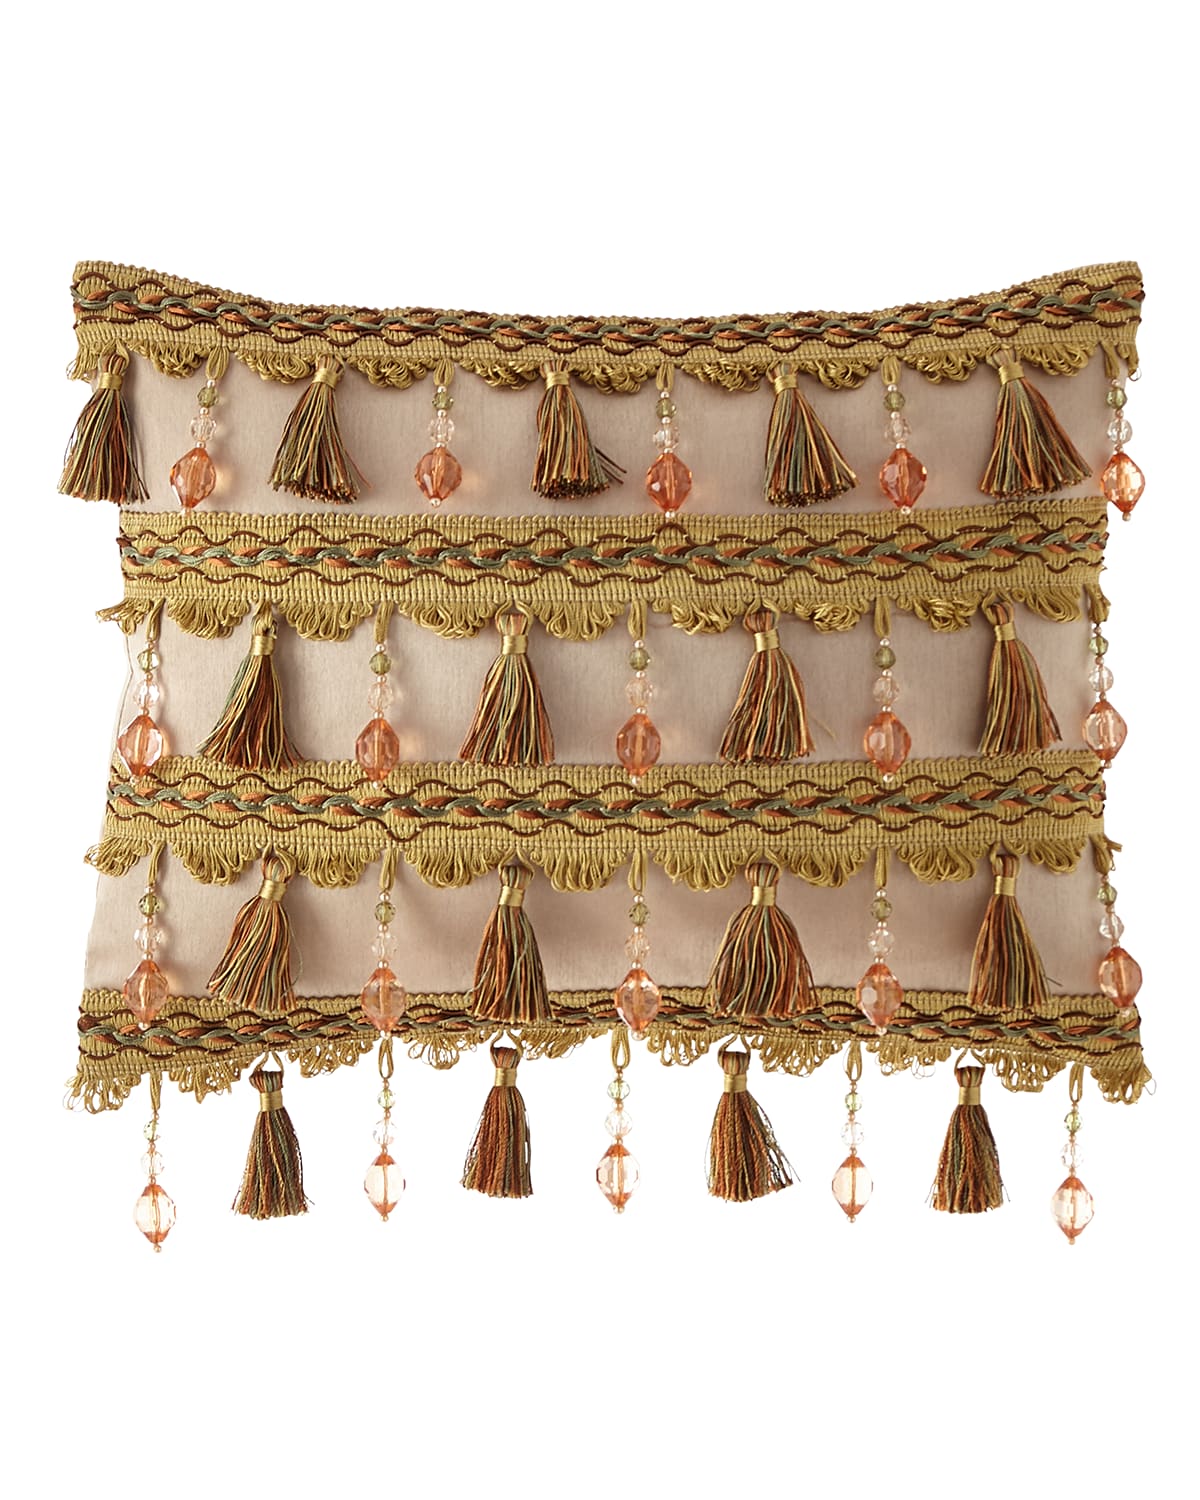 Image Dian Austin Couture Home Viburnum Breakfast Pillow with Tassels and Beads